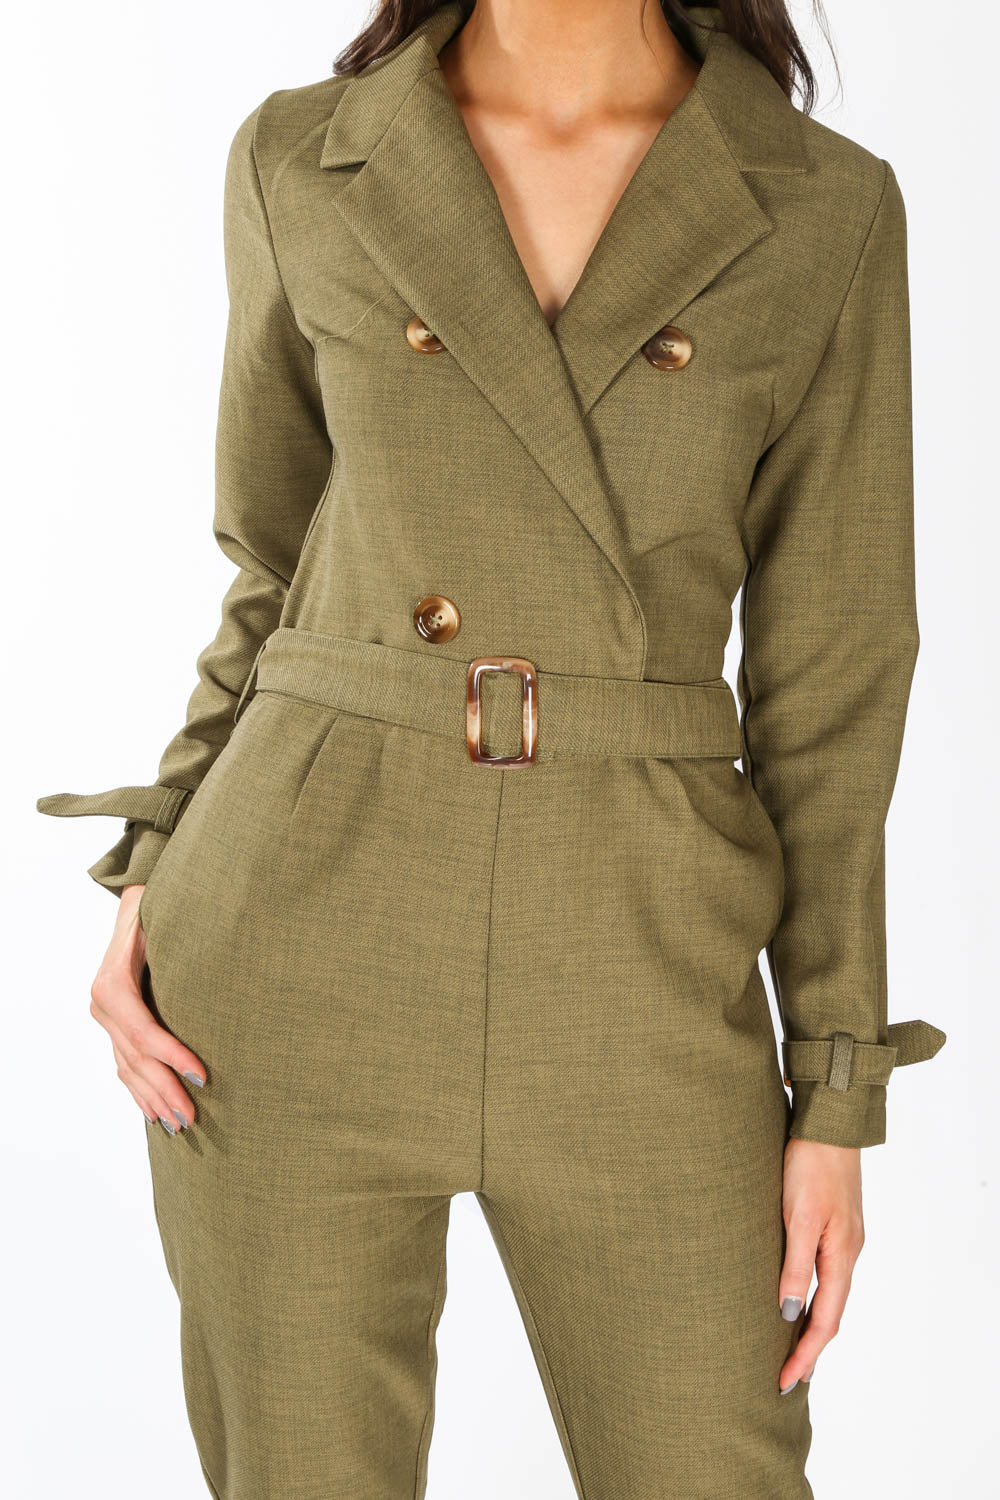 Khaki Tailored Belted Utility Jumpsuit